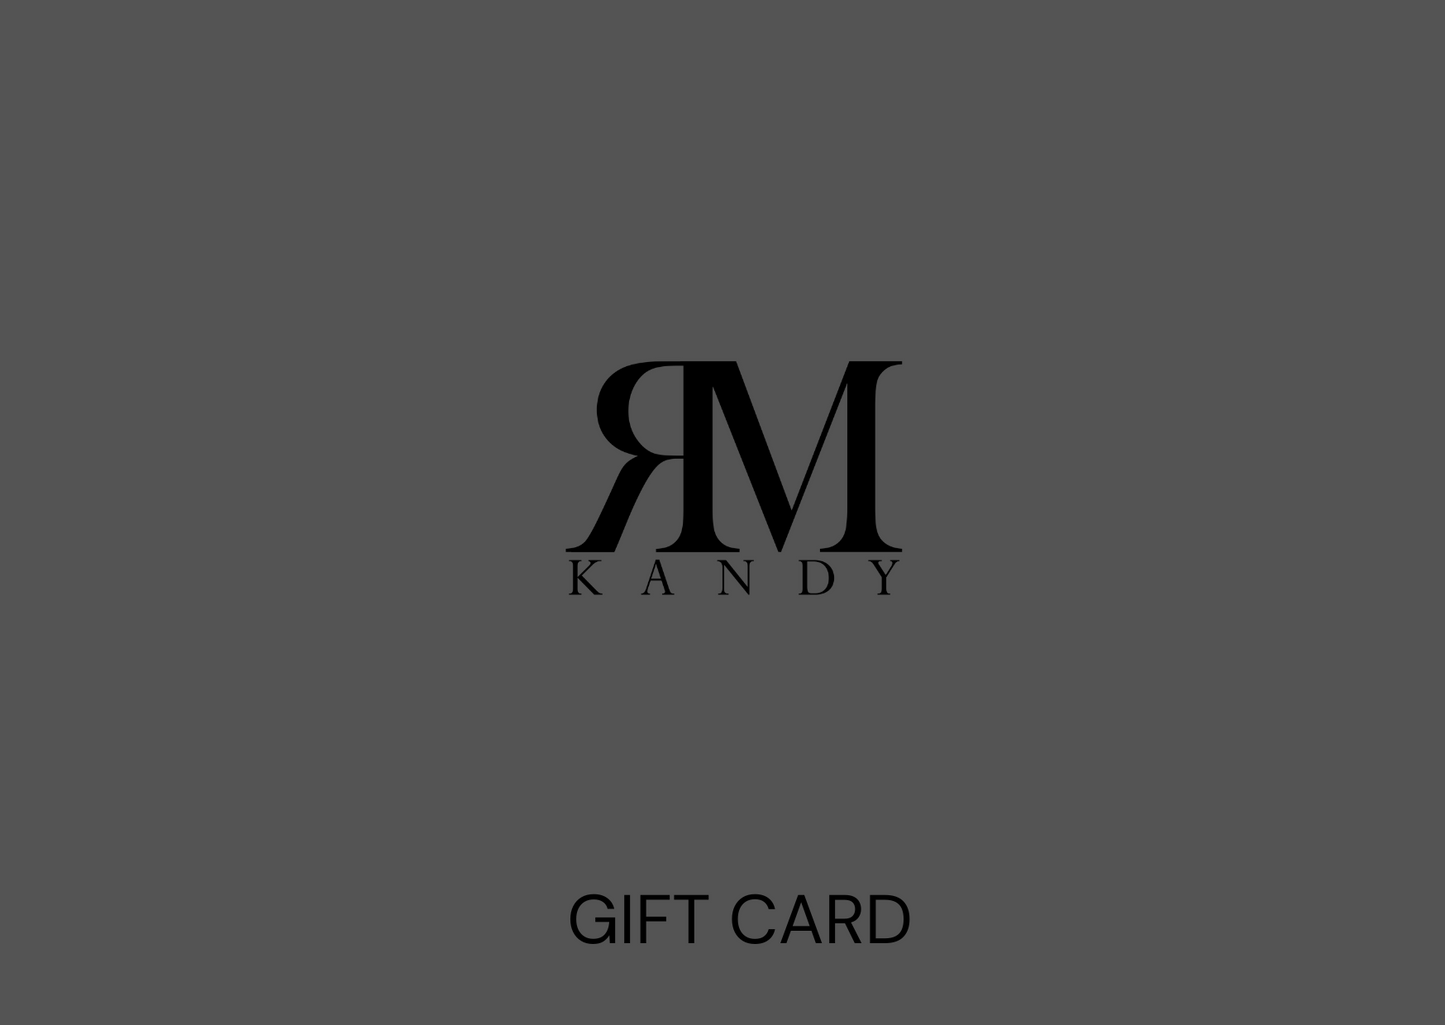 Gift Card for sale at RM Kandy jewelry for women and men 